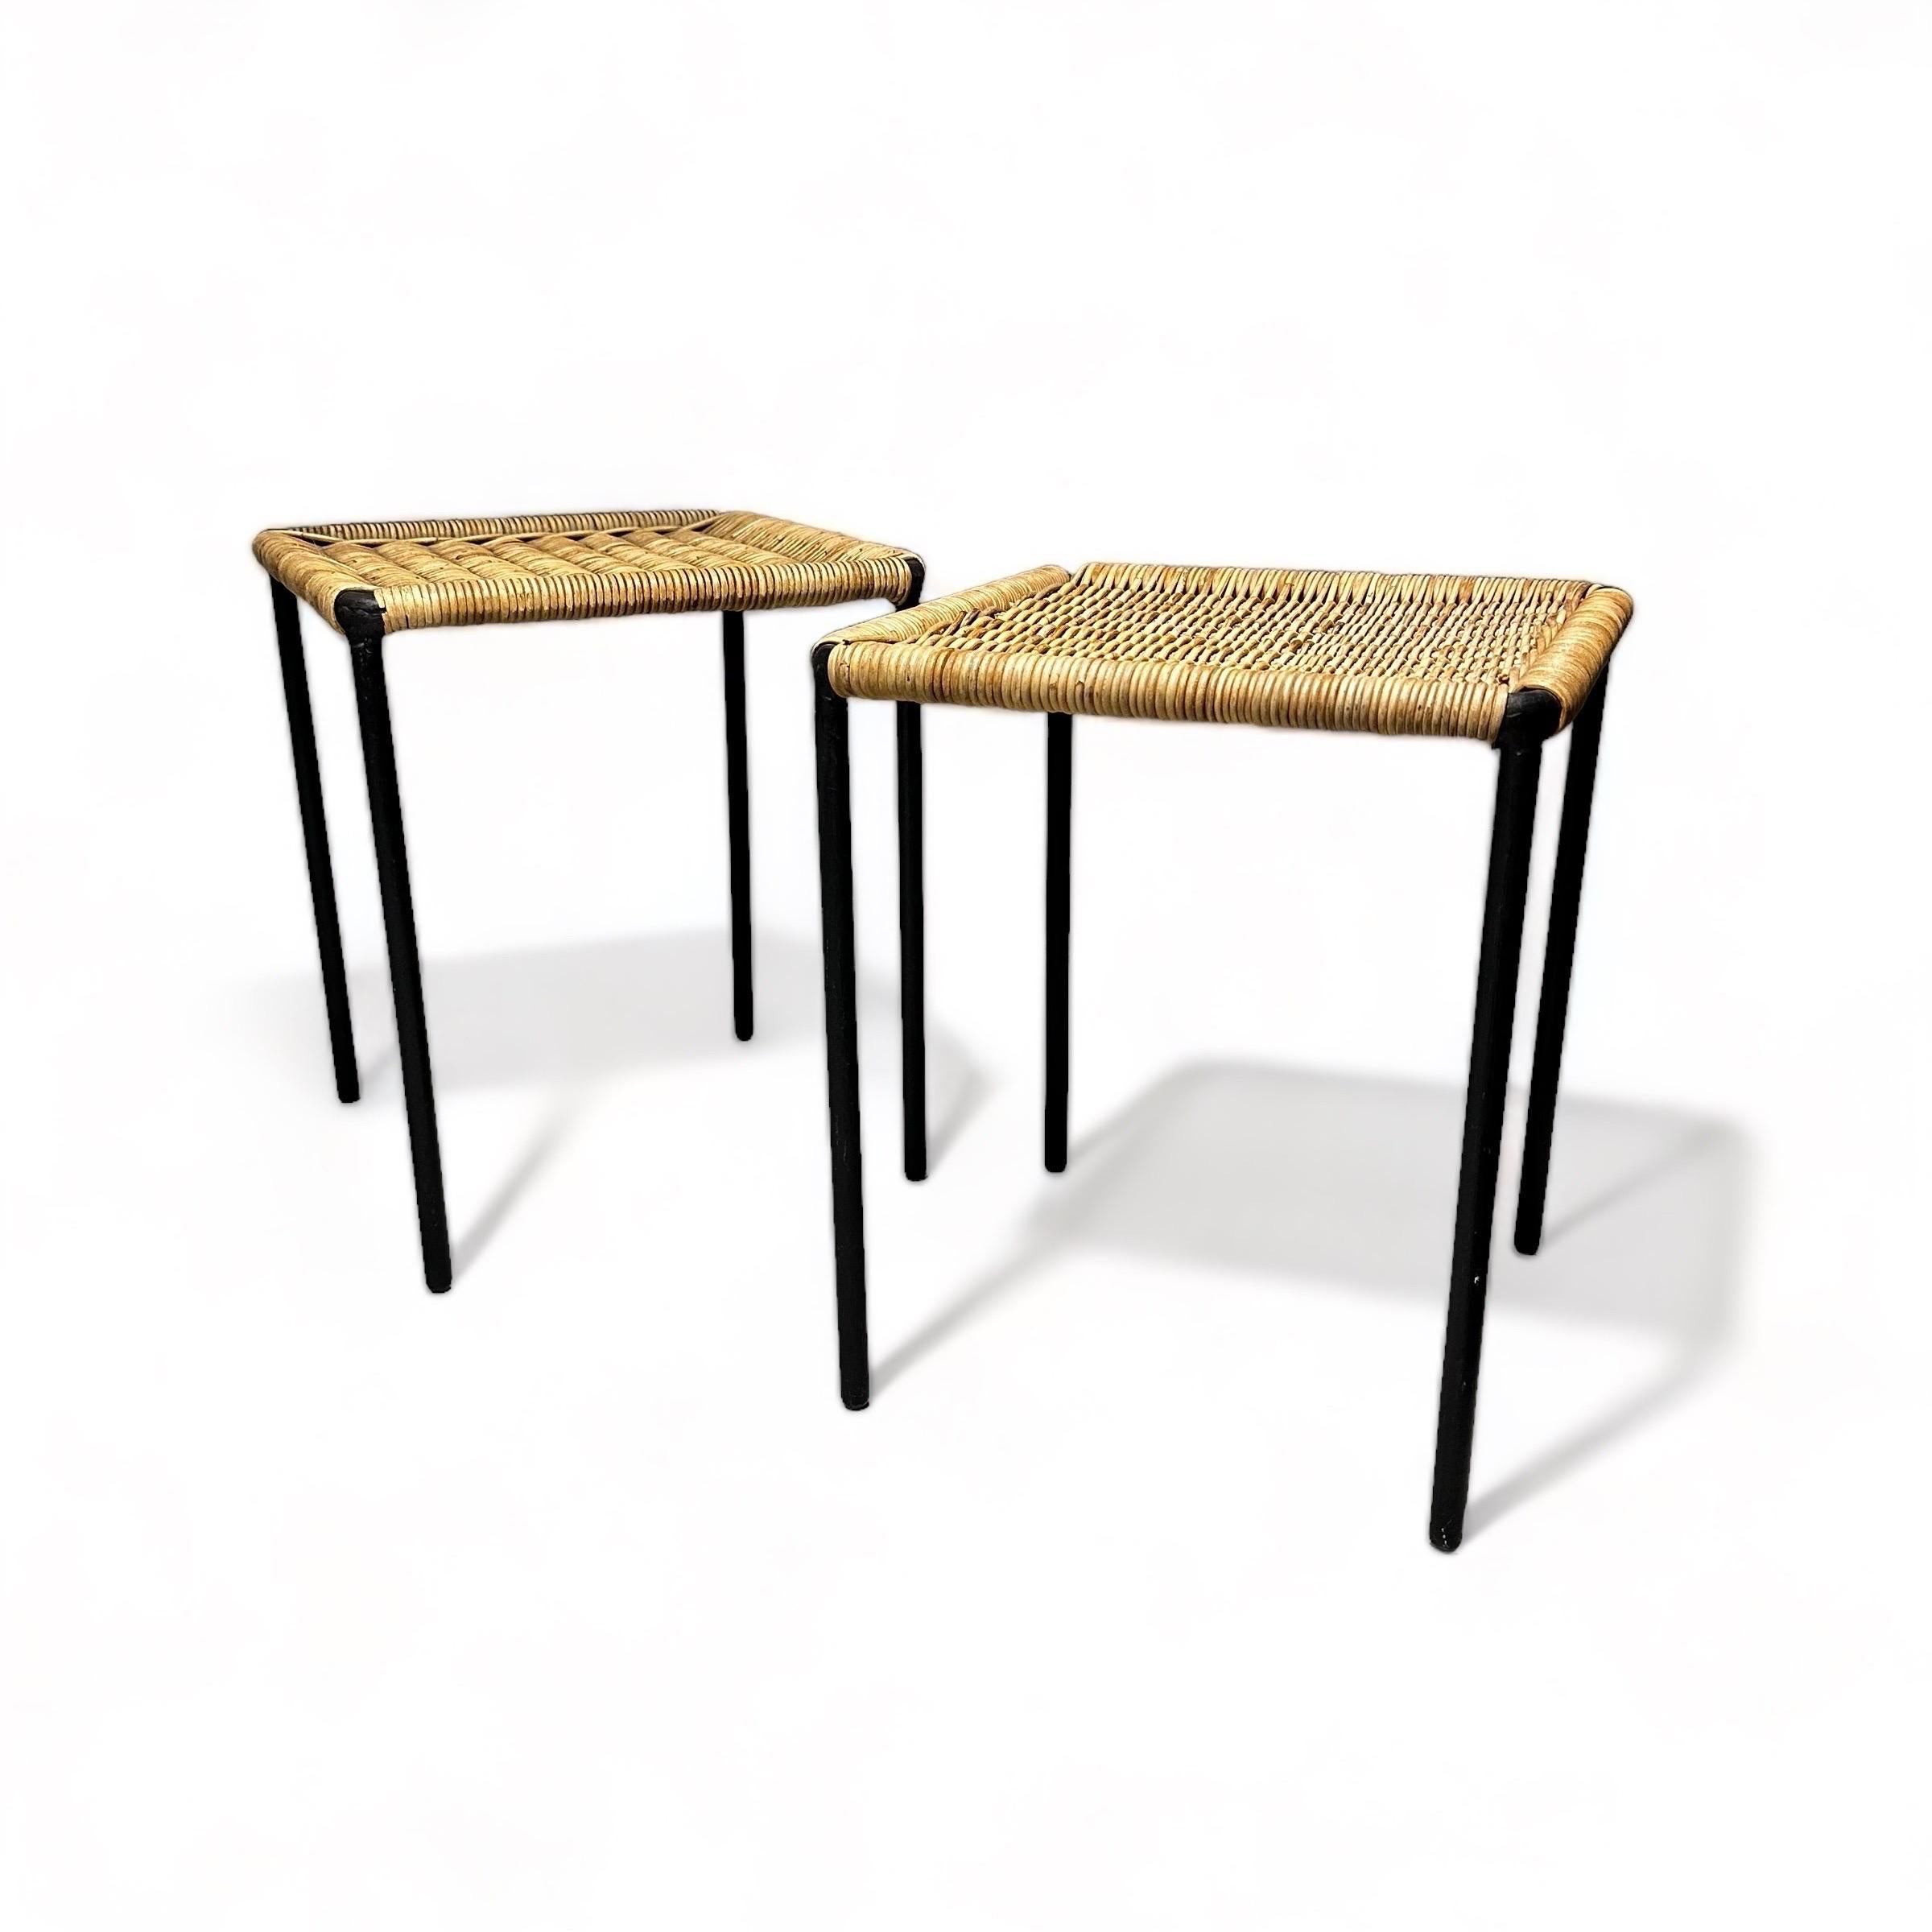 Mid-Century Modern Carl Auböck Side Tables with Black Iron and Rattan, Set of Two, Austria 1950s For Sale